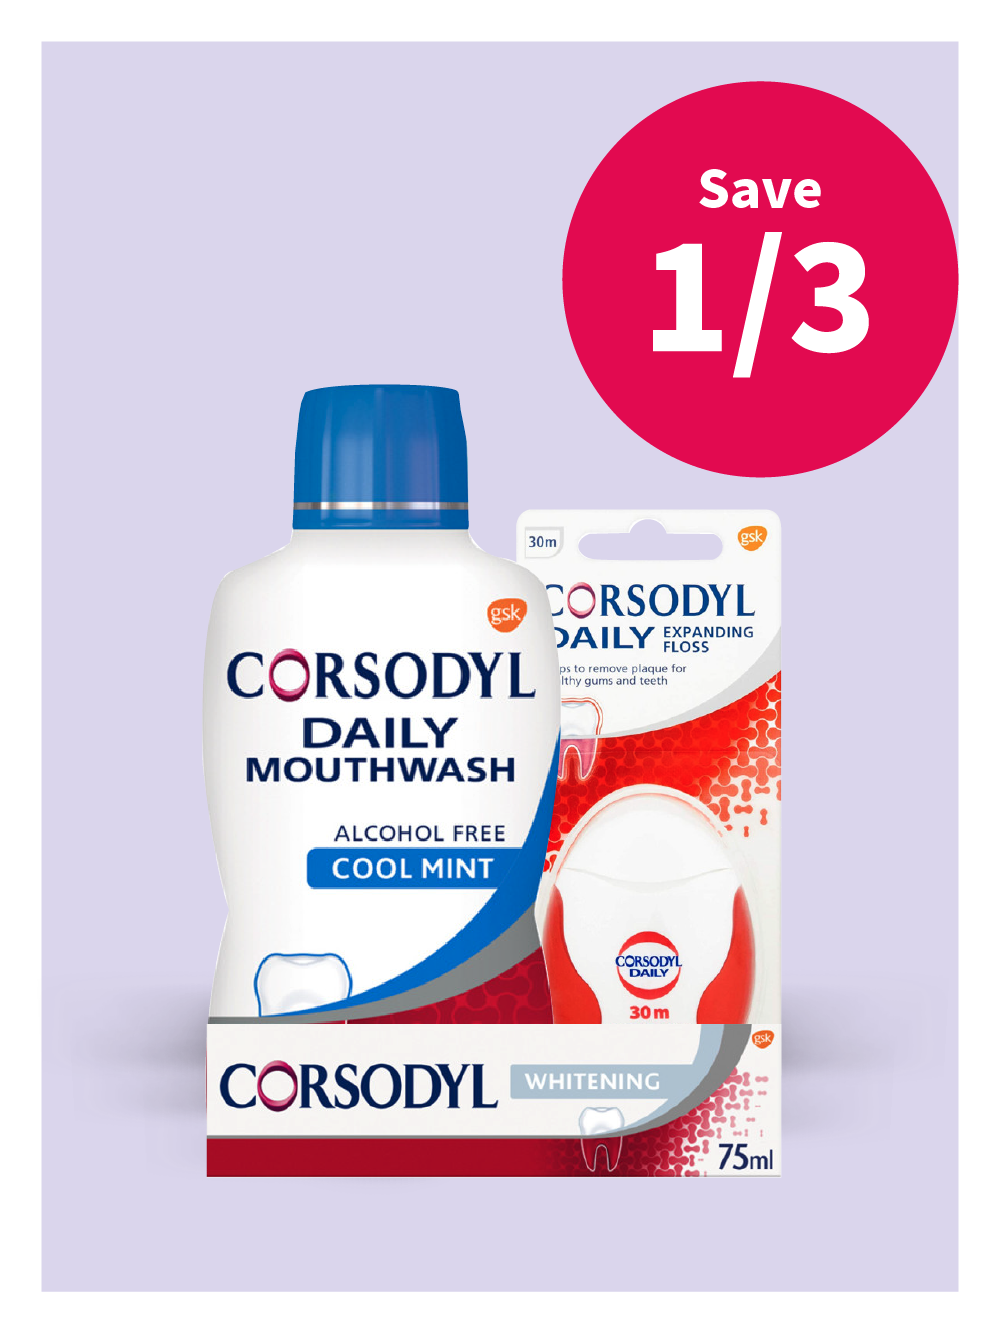 Save 1/3 on selected Corsodyl